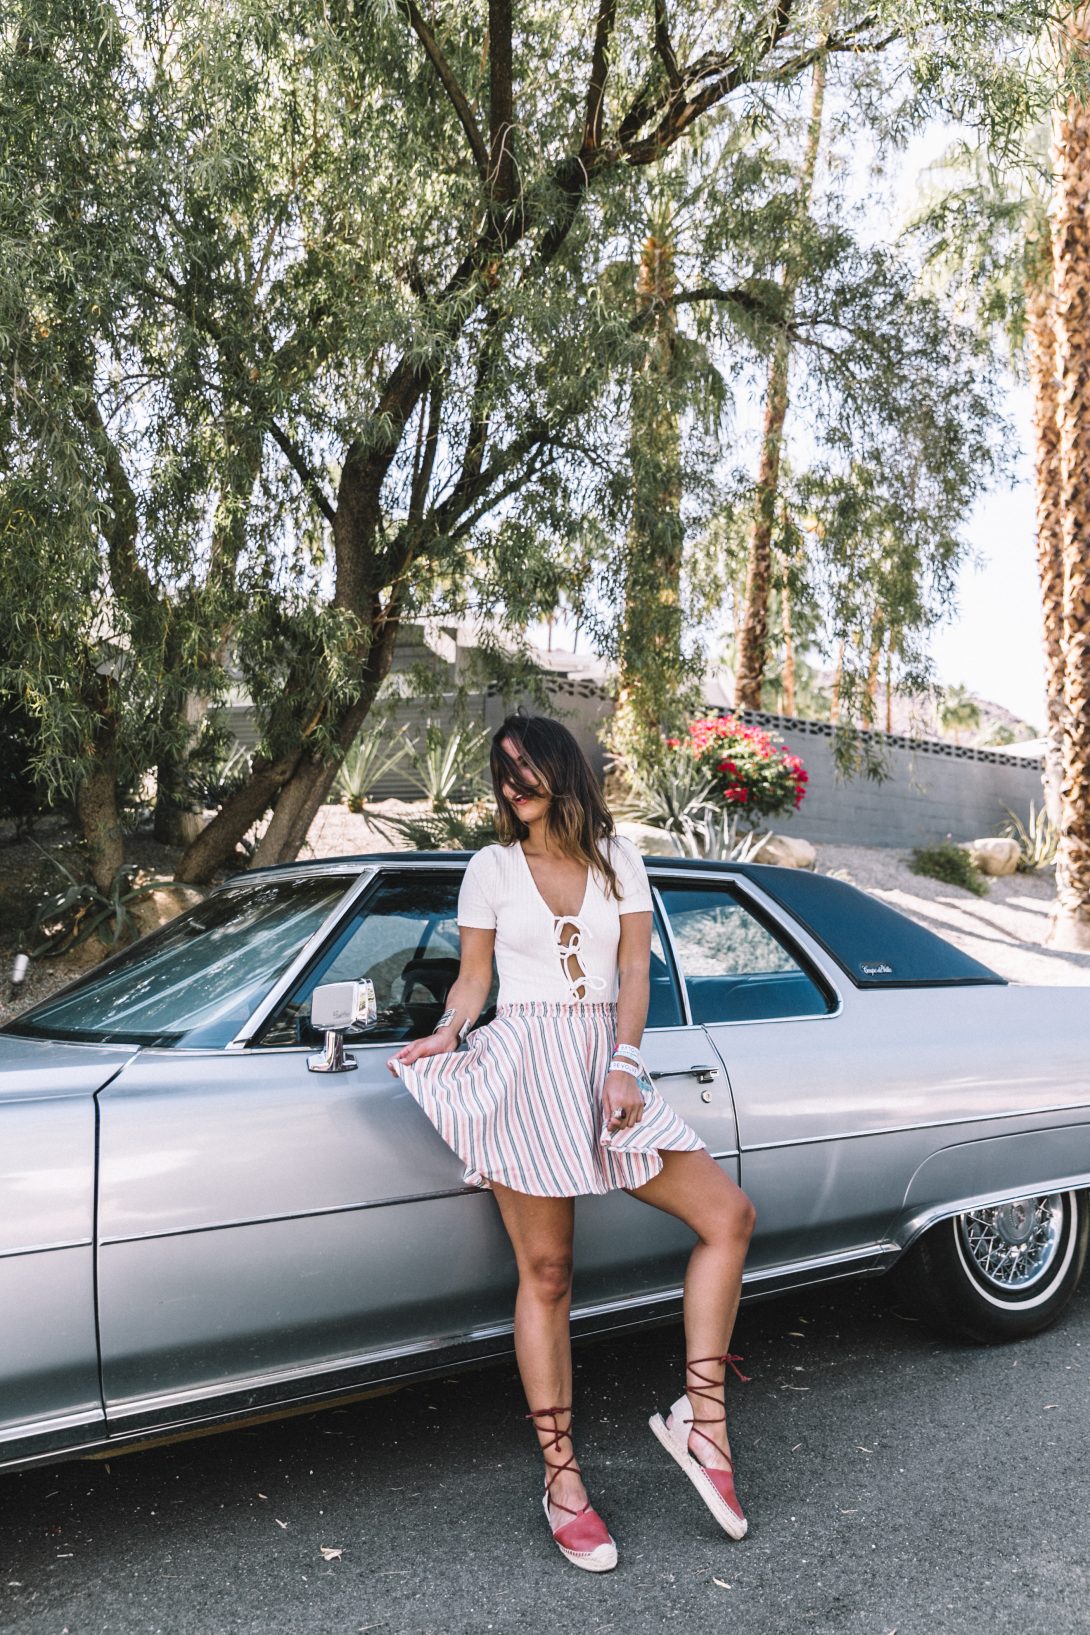 Lace_Up_Body-Privacy_Please-Revolve_Clothing-Striped_Mini_Skirt-Soludos_Espadrilles-Palm_Springs-Outfit-Collage_Vintage-7